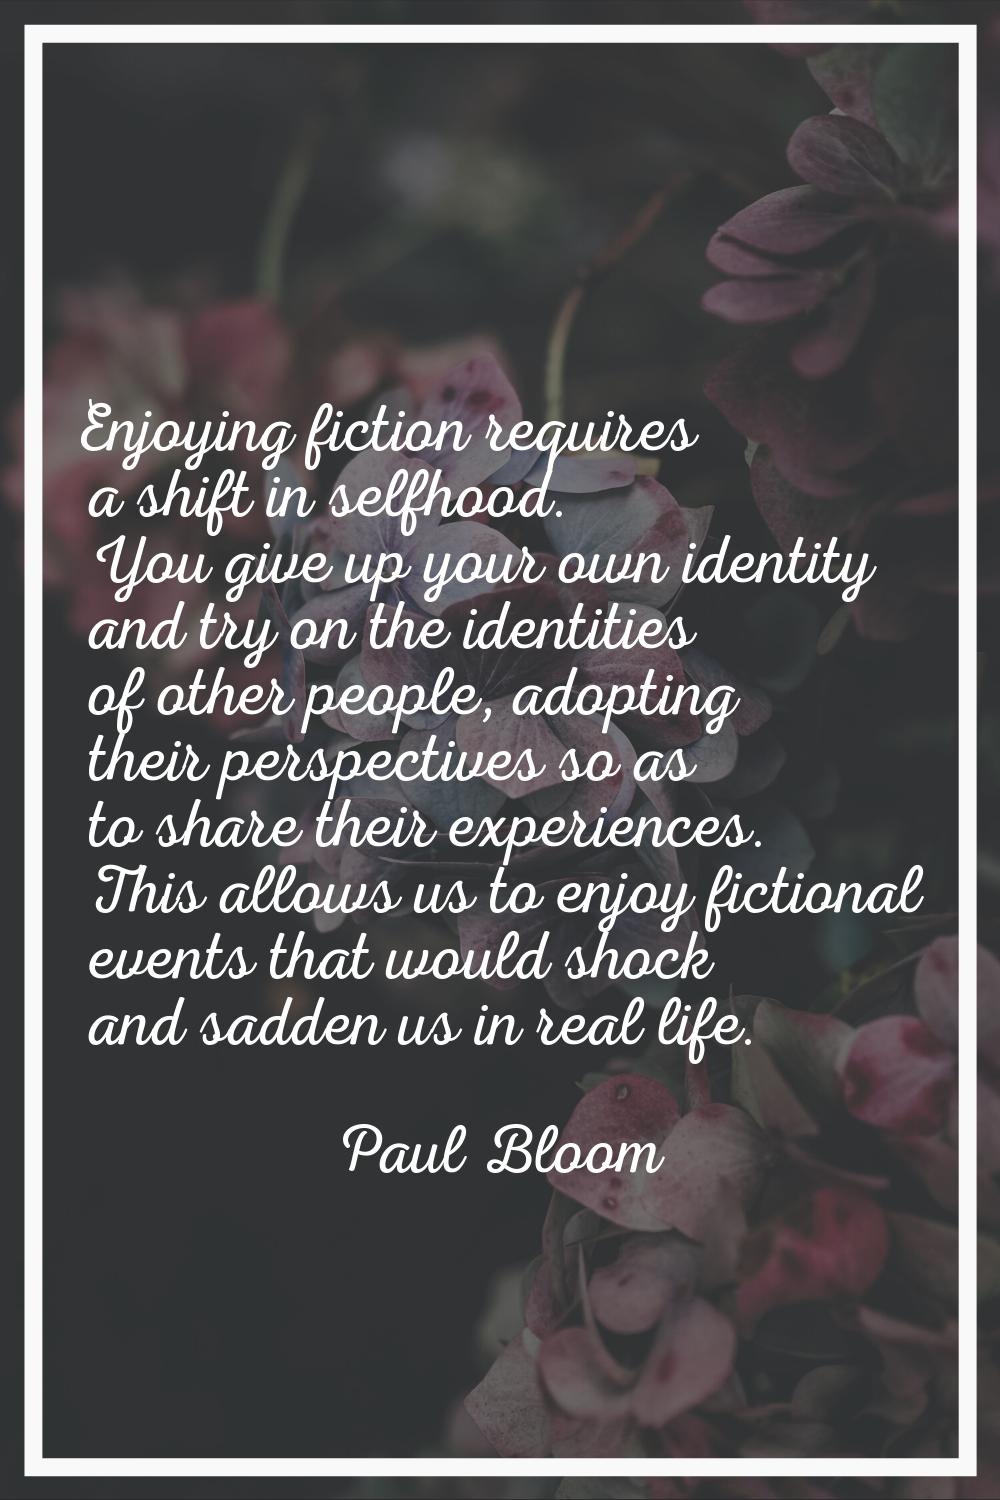 Enjoying fiction requires a shift in selfhood. You give up your own identity and try on the identit